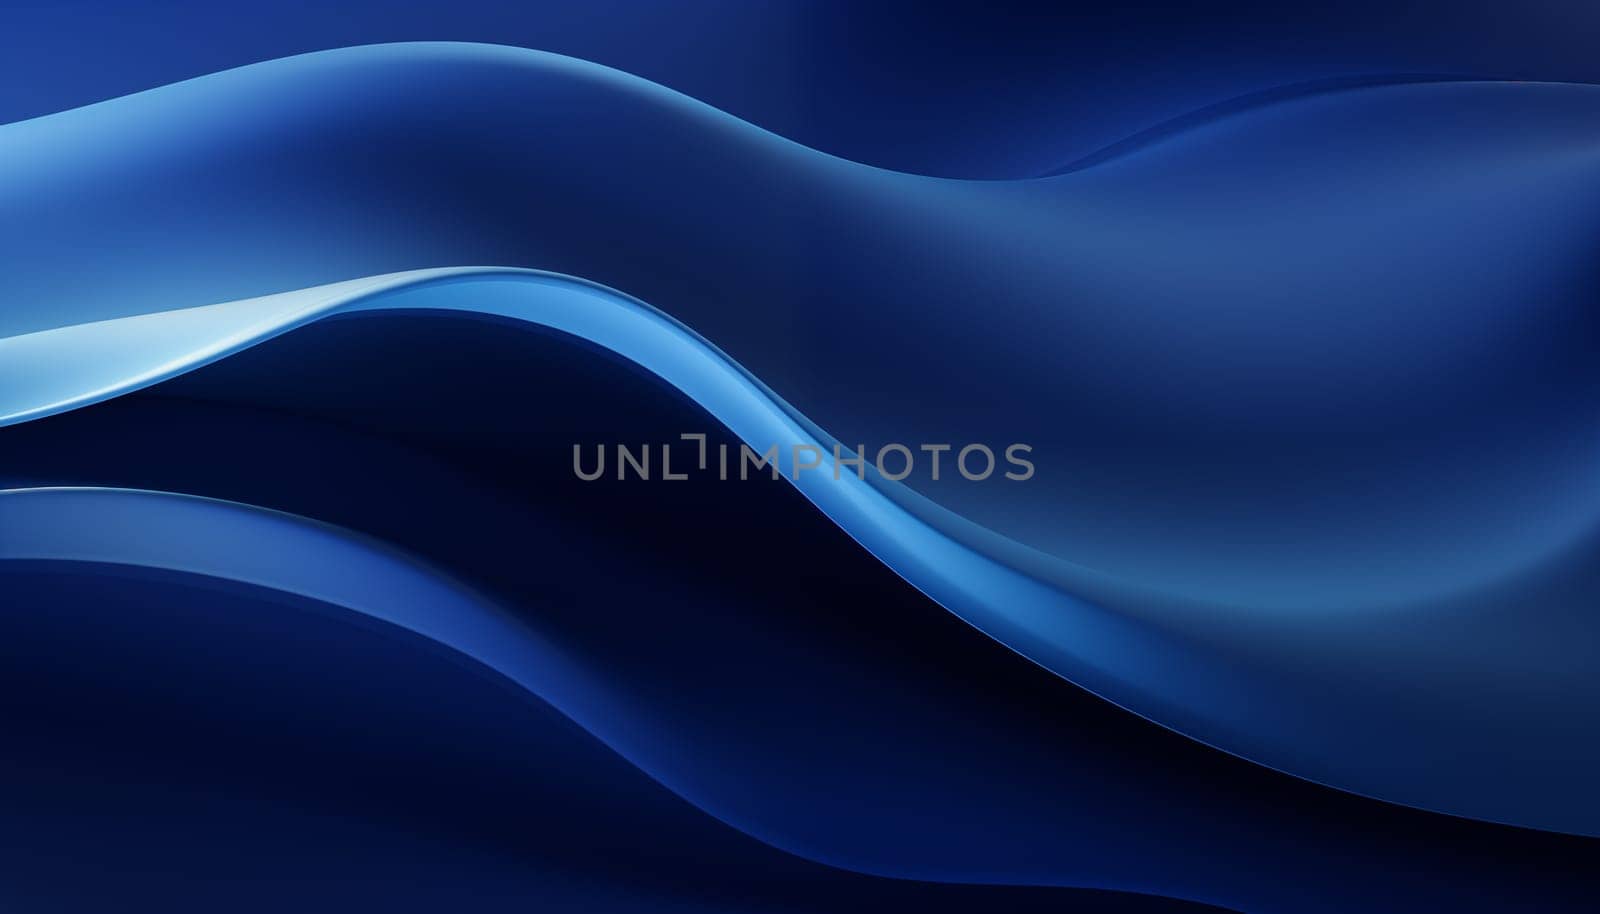 Navy blue waves background by Nadtochiy